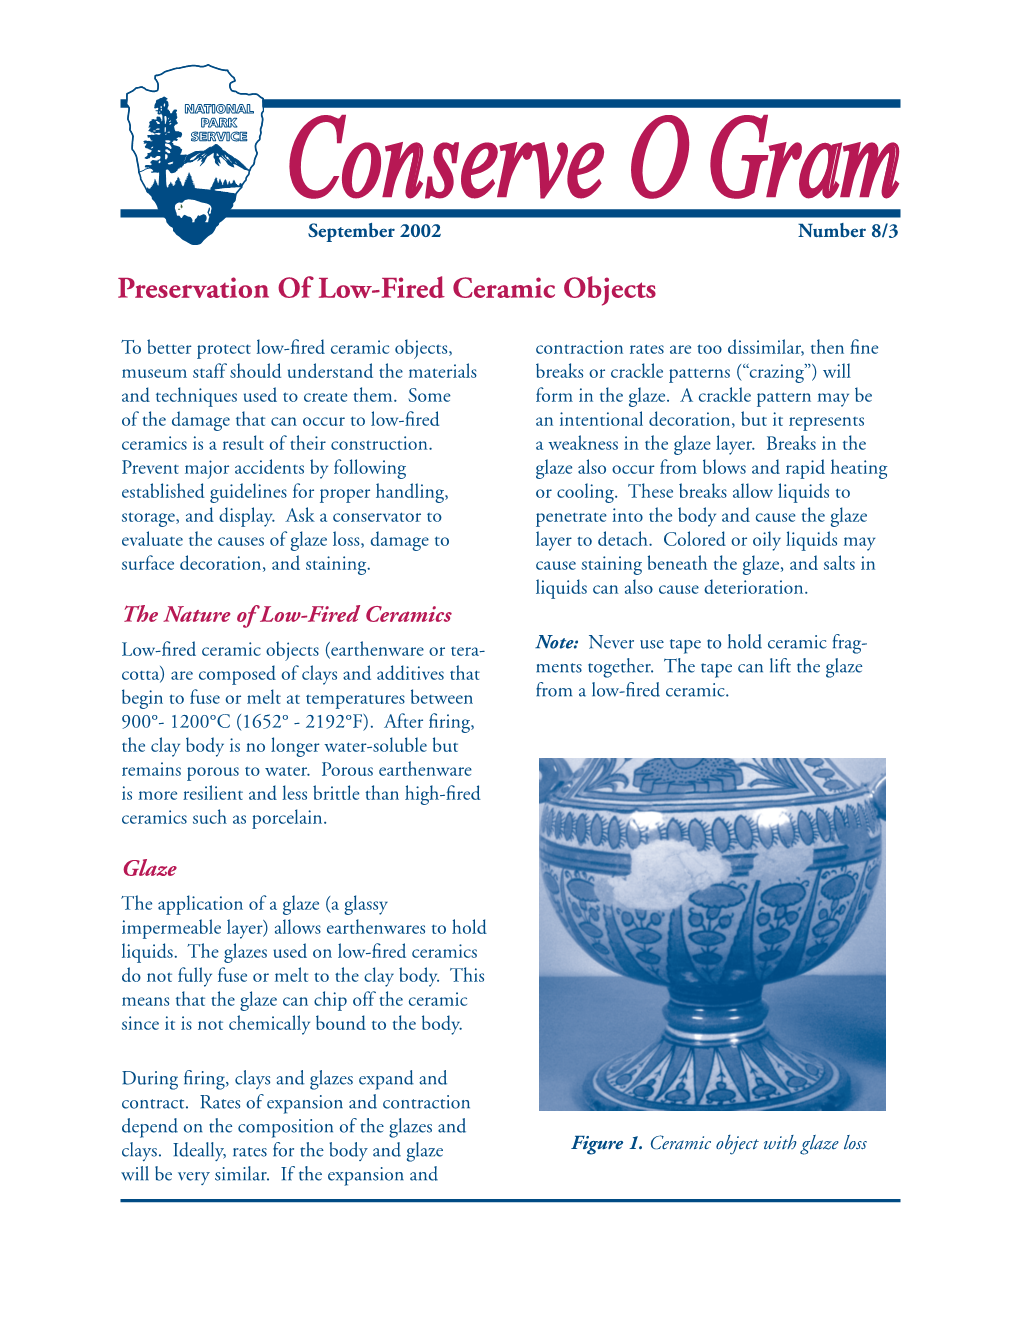 Conserve O Gram Volume 8 Issue 3: Preservation of Low-Fired Ceramic Objects